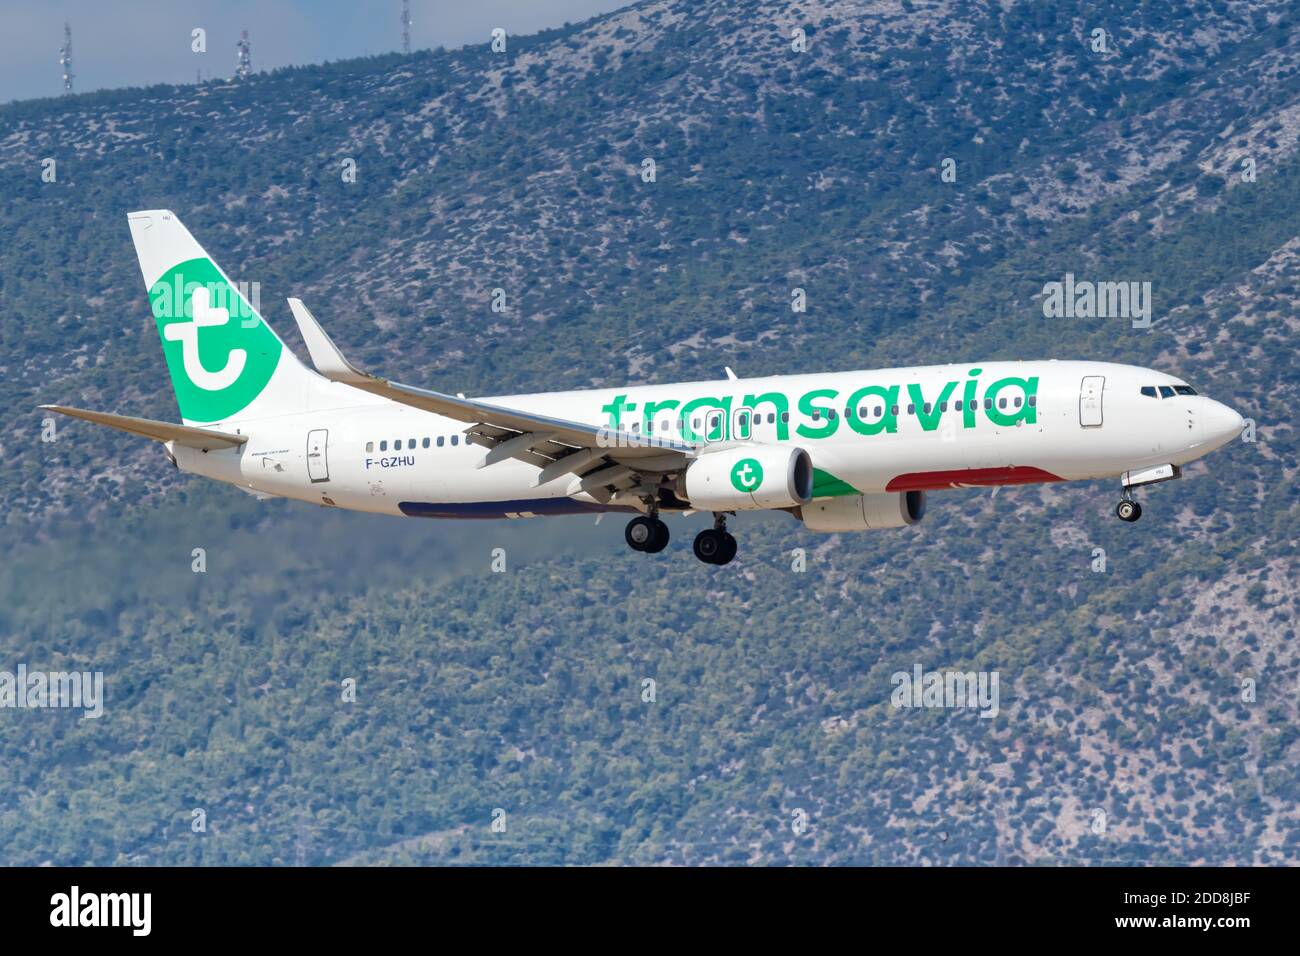 Athens, Greece - September 22, 2020: Transavia Boeing 737-800 airplane at Athens Airport in Greece. Boeing is an American aircraft manufacturer headqu Stock Photo